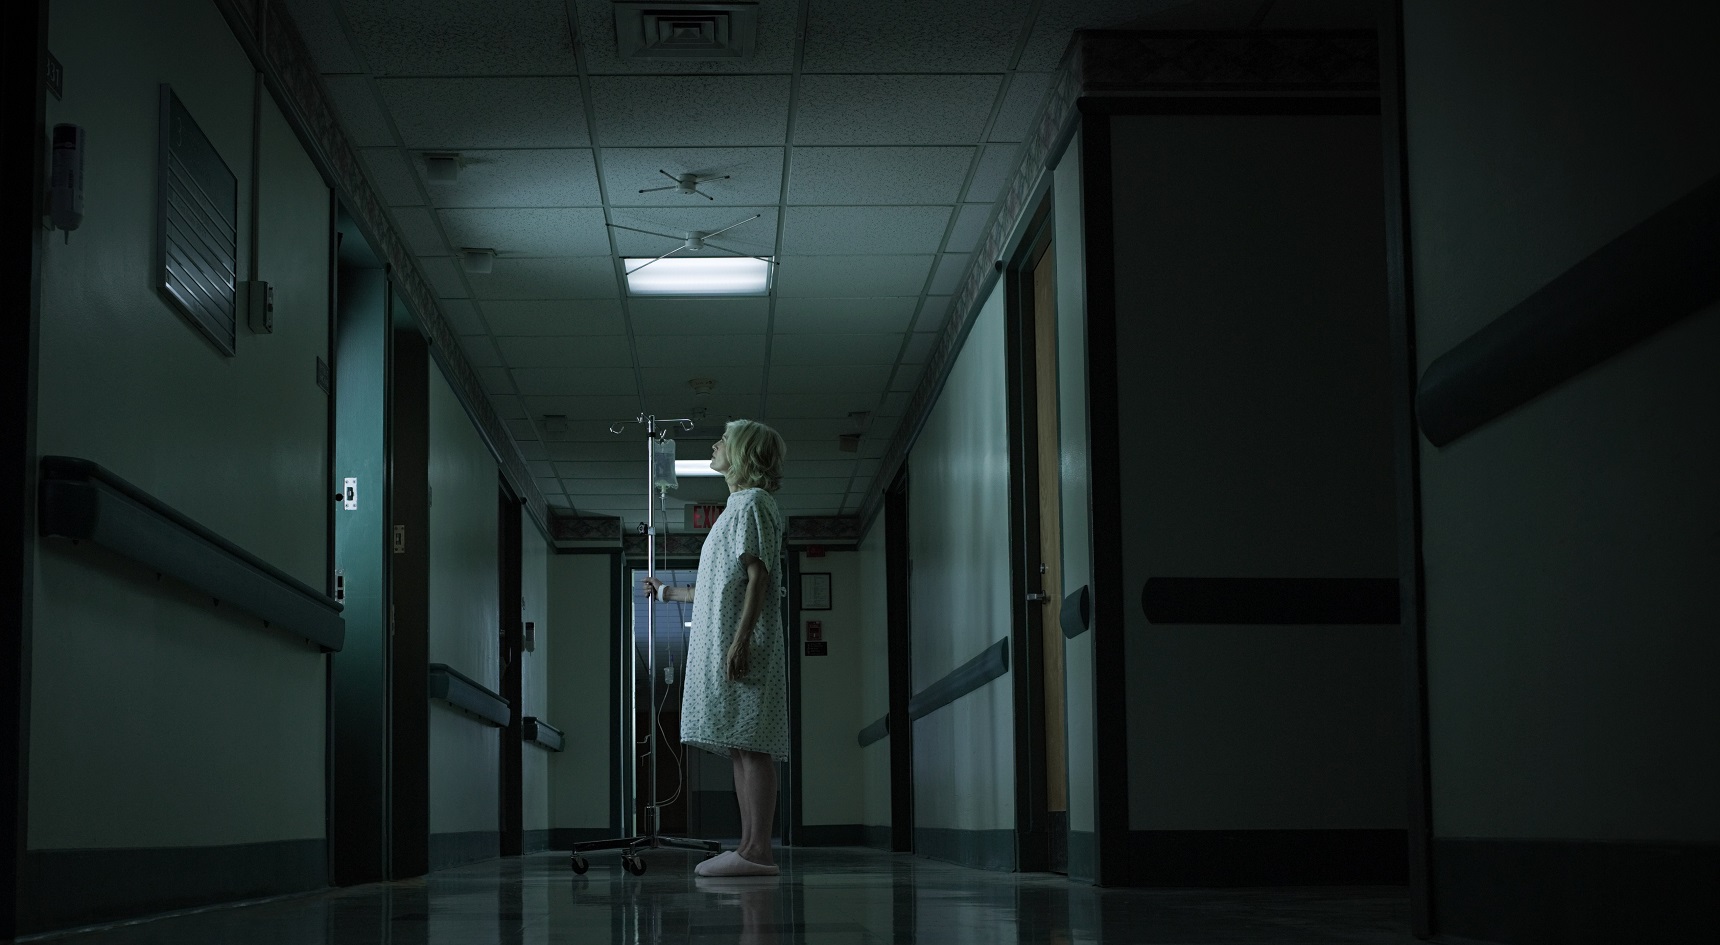 Female patient with intravenous drip stands in dark hospital corridor.